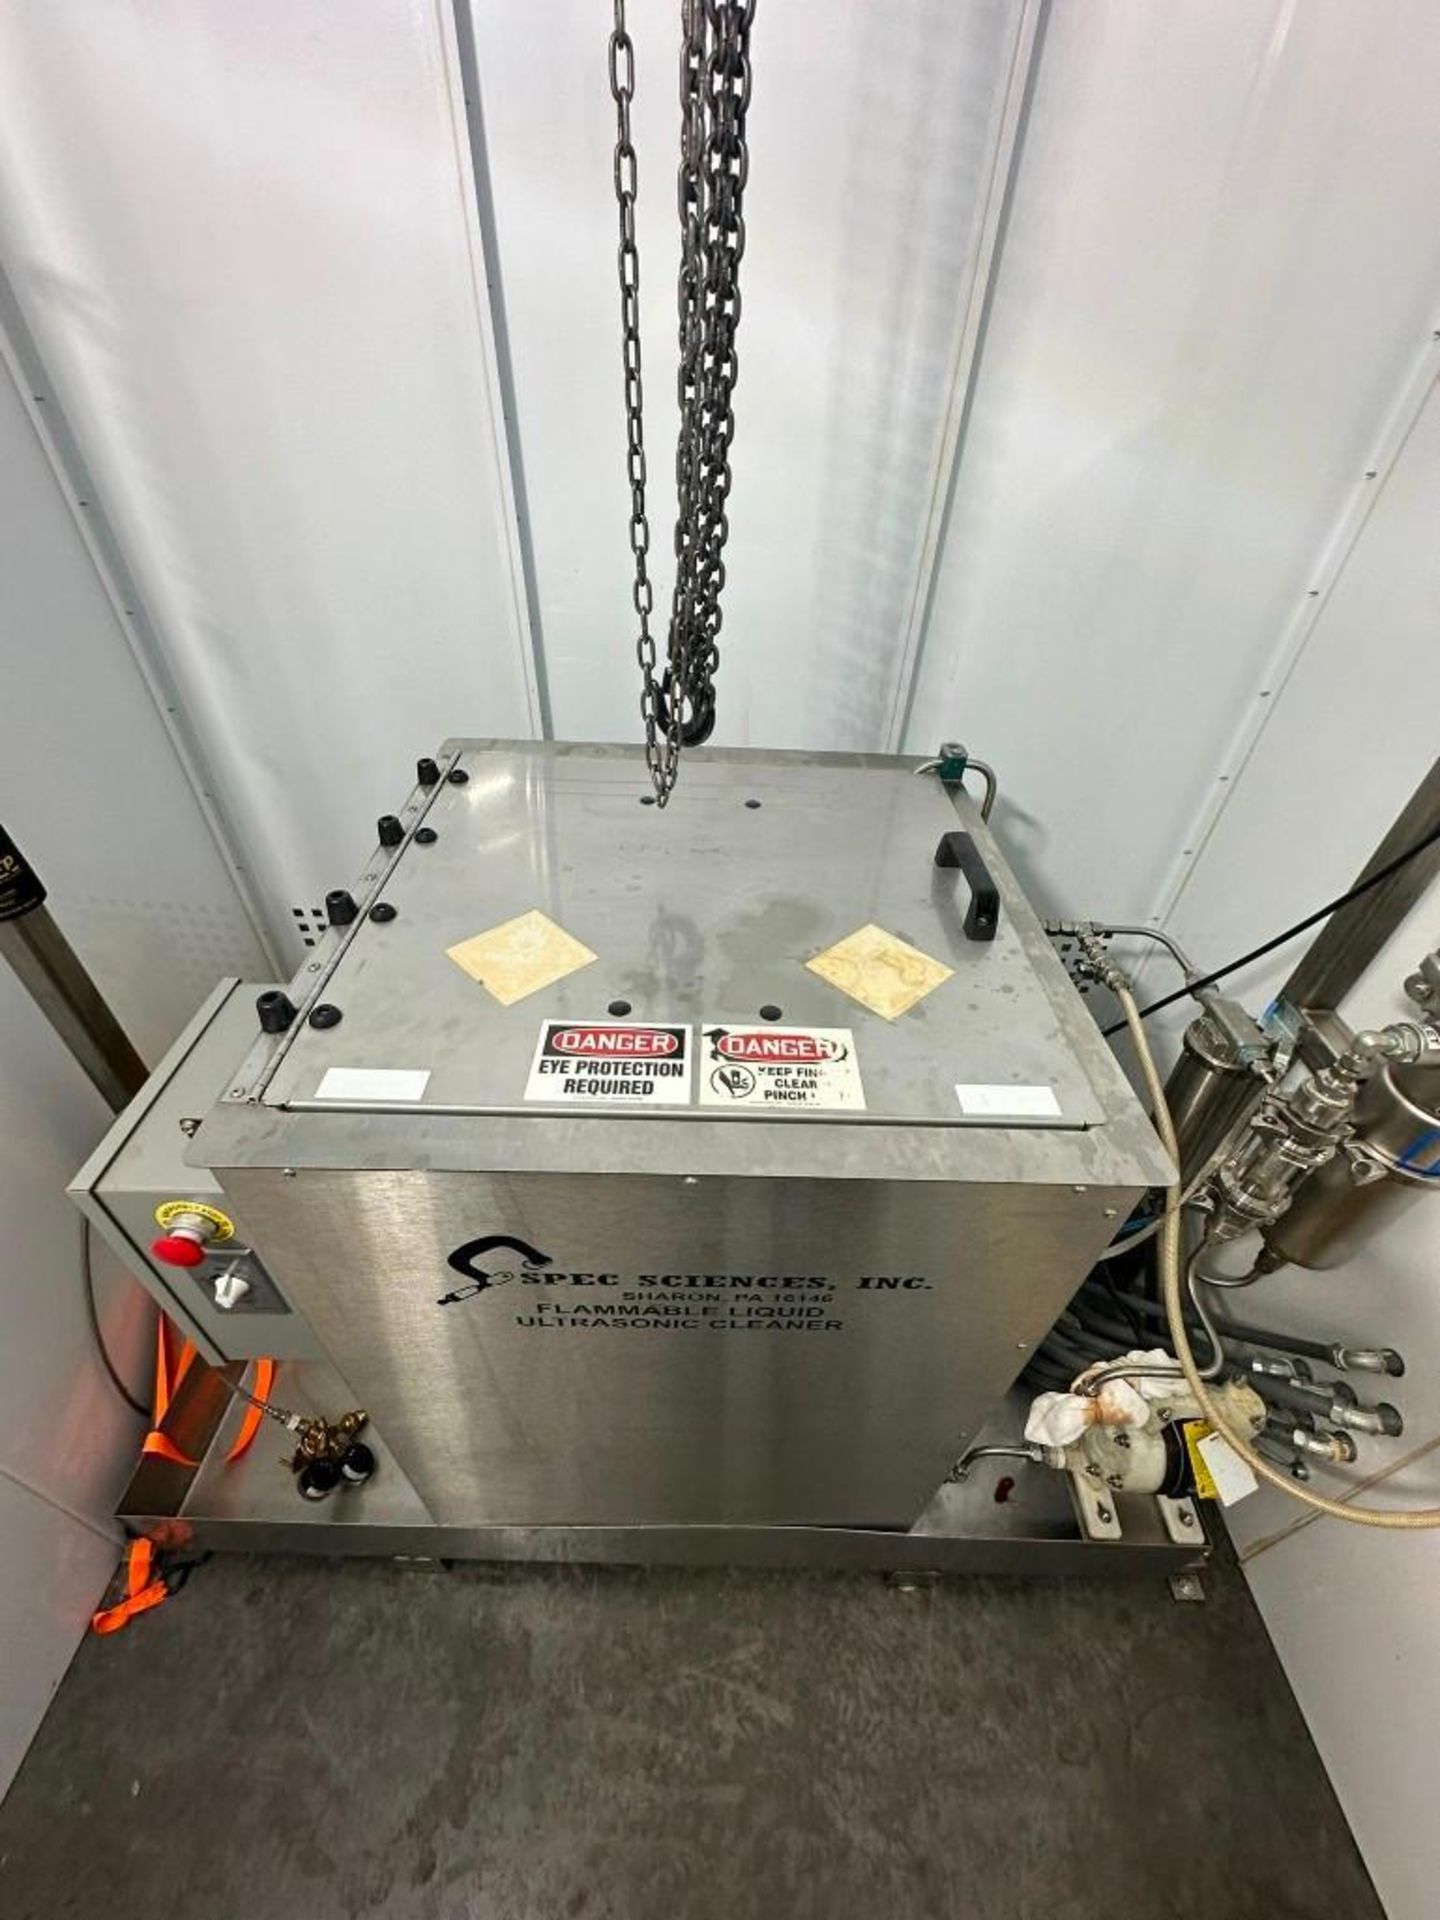 Spec Sciences Flammable Liquid Ultrasonic Cleaner Model 242436, S/N 00619150, with Control Panel and - Image 3 of 14